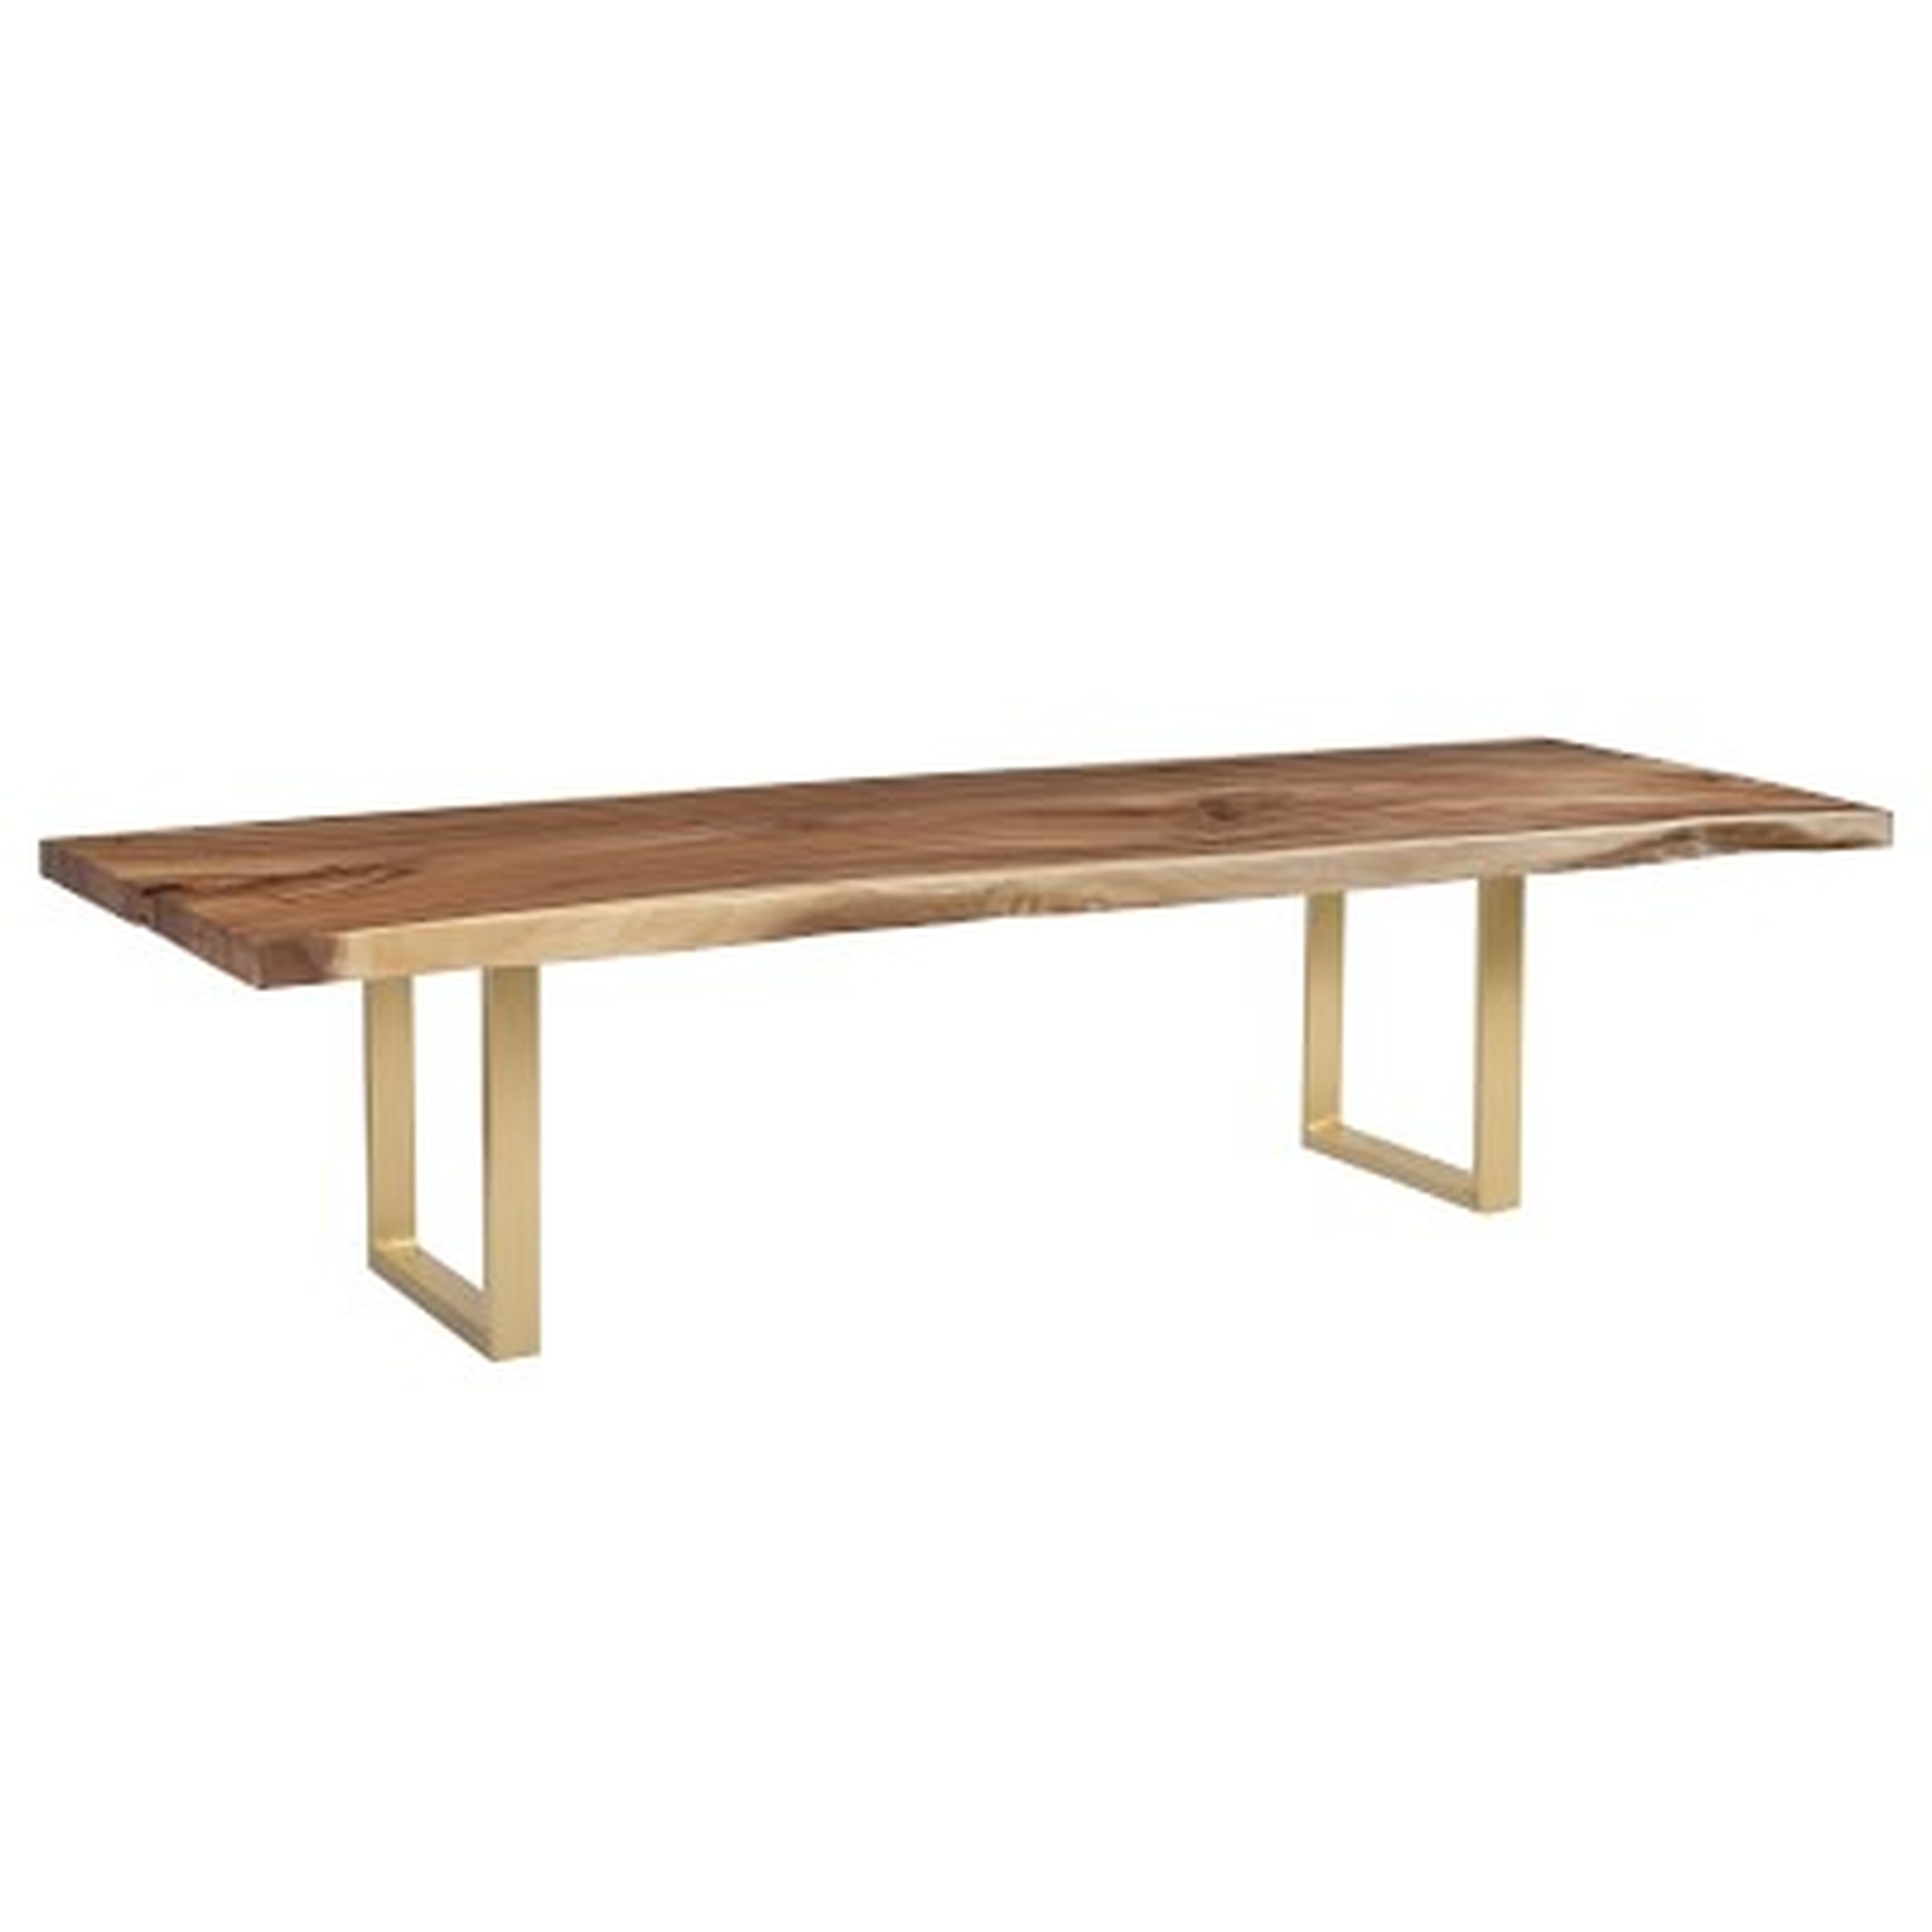 Wilton Live Edge Dining Table, 120, Wood, Natural, Antique Brass - Williams Sonoma